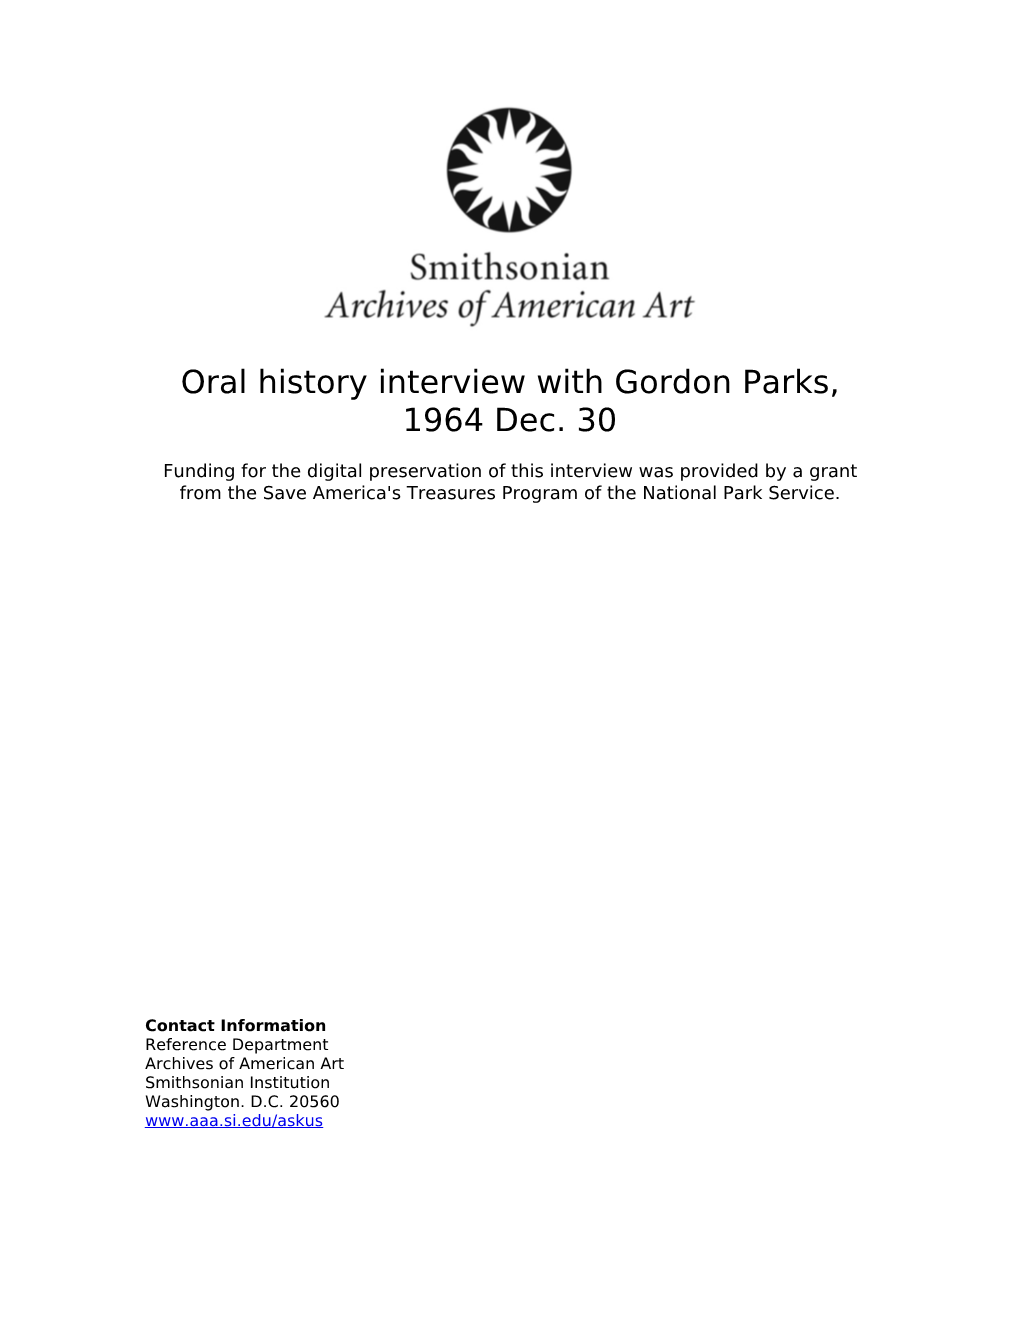 Oral History Interview with Gordon Parks, 1964 Dec. 30